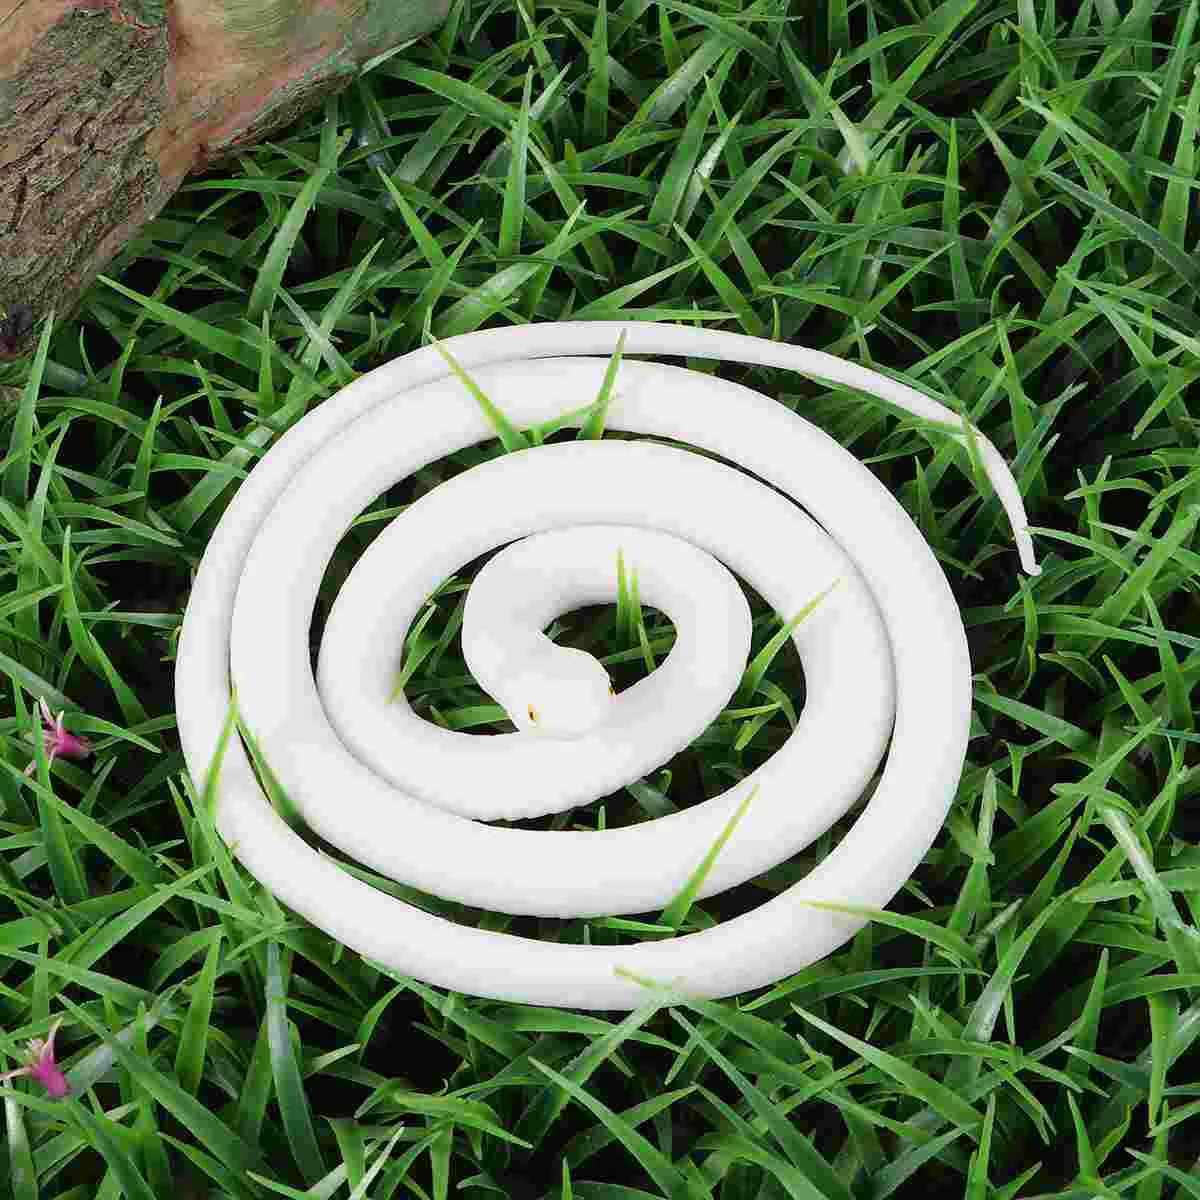 

120cm White Snake Small Rubber Snake Garden Toys, Realistic Snake Figure Snake Toys Stretchy Reptiles for Party Decoration